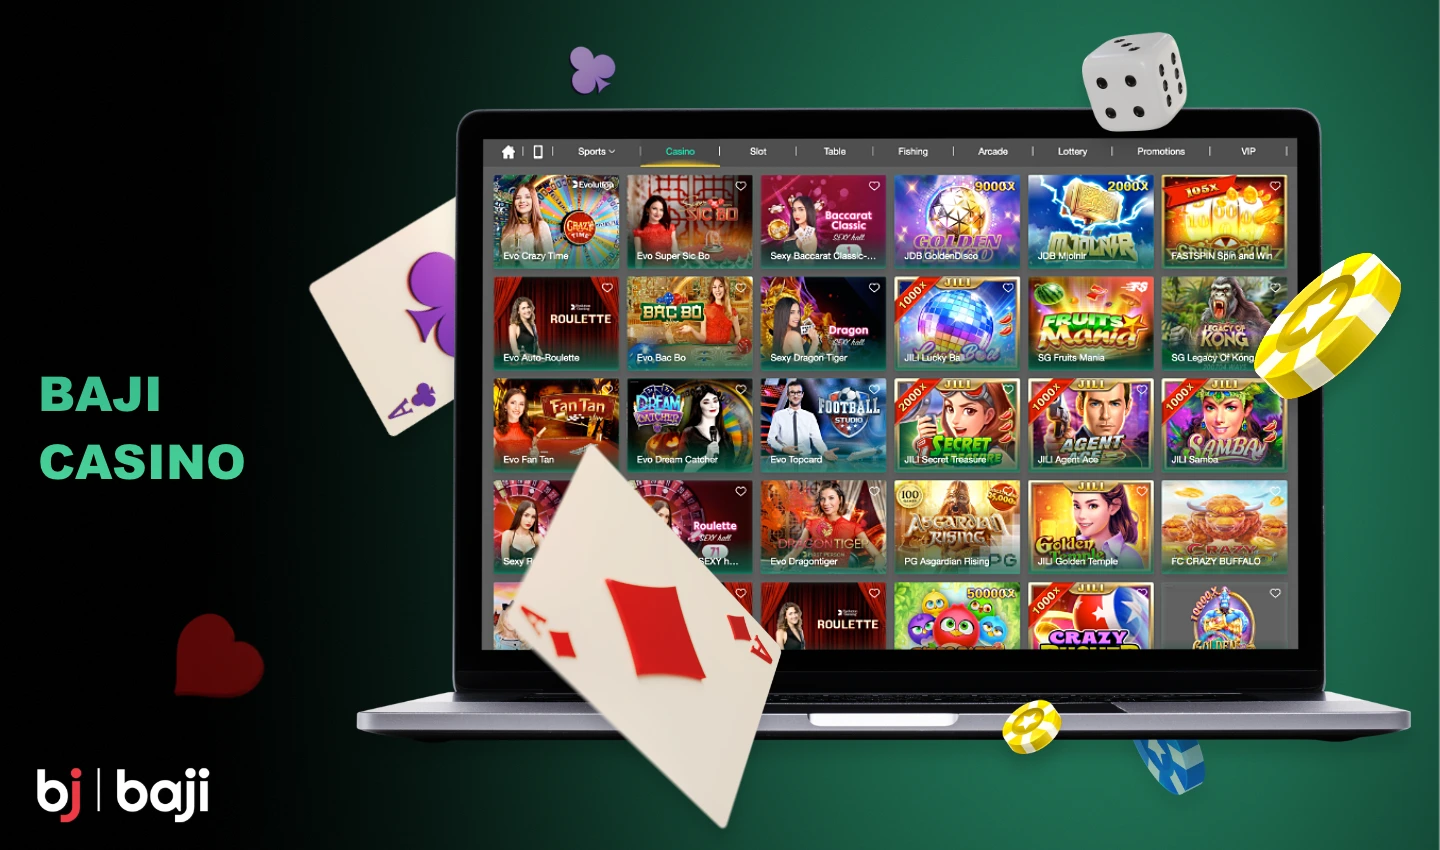 baji live casino bd Consulting – What The Heck Is That?